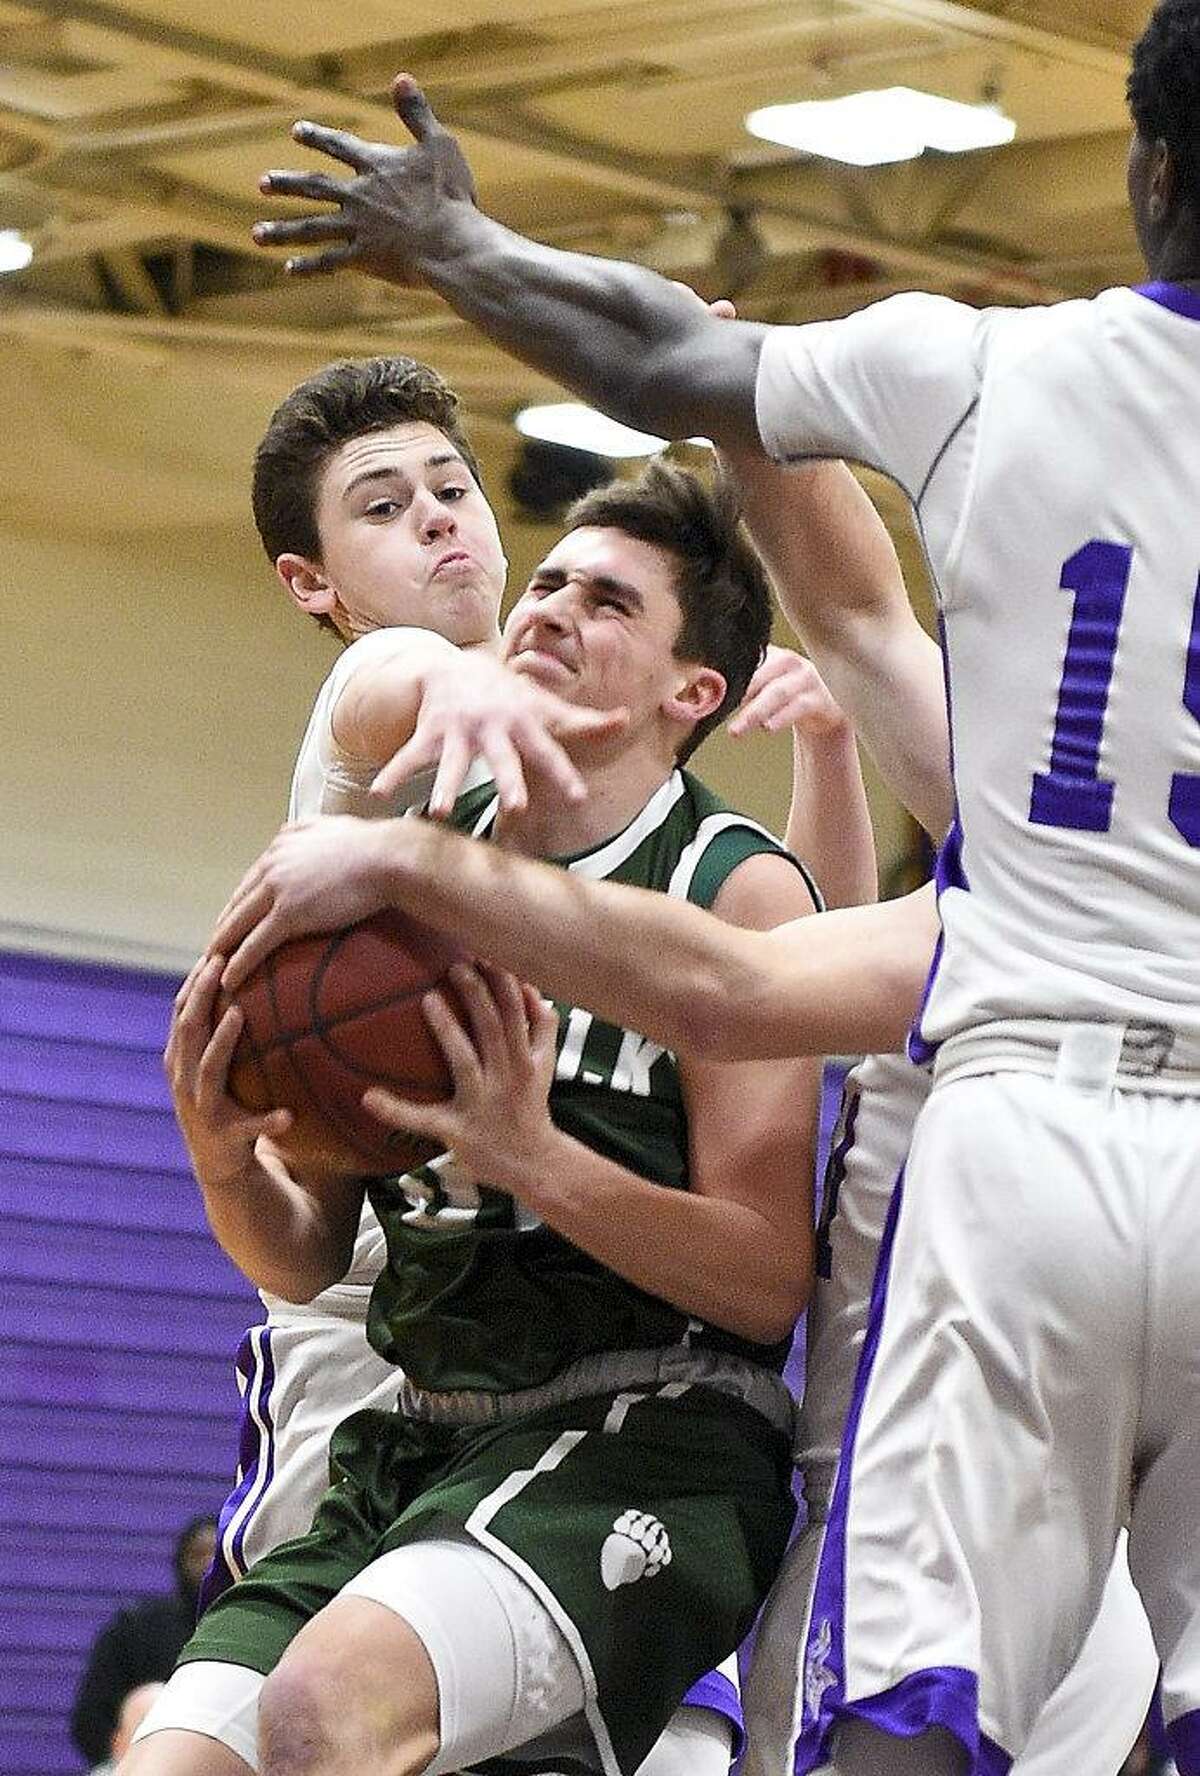 Westhill Jack Schlachtenhaufen (24) fouls Norwalk's Joe Benincaso (31) on his drive to the basket between Schlachtenhaufen and Westhill Wyklend Turene (15), at right, during a FCIAC boys basketball game at Westhill High School in Stamford, Conn. on Tuesday, Jan. 9, 2018.